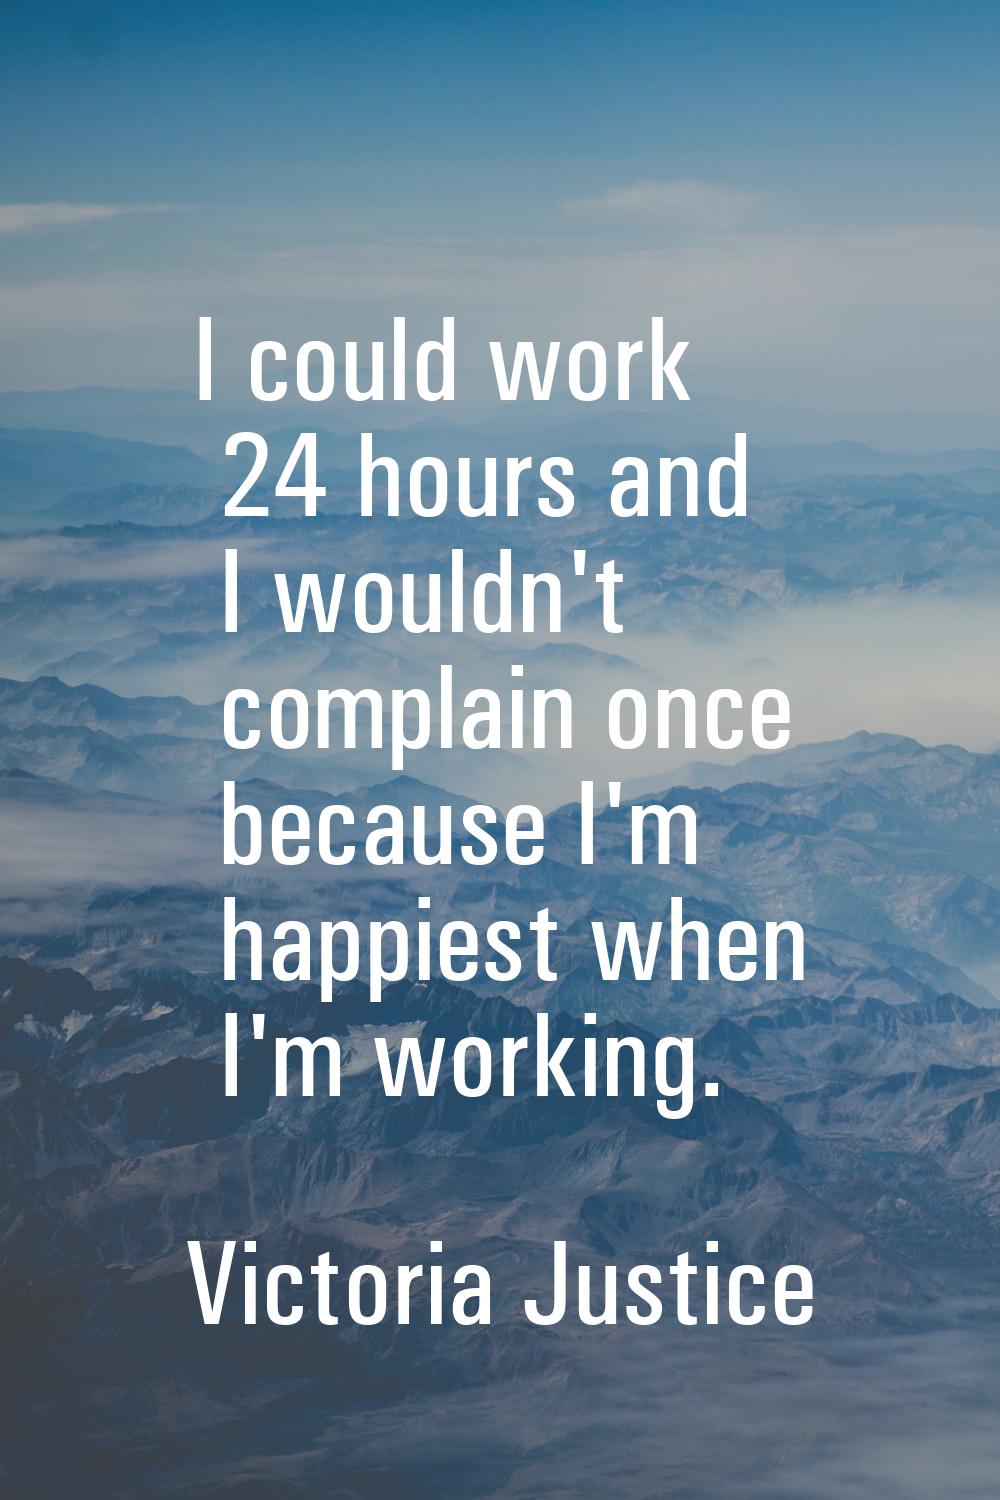 I could work 24 hours and I wouldn't complain once because I'm happiest when I'm working.